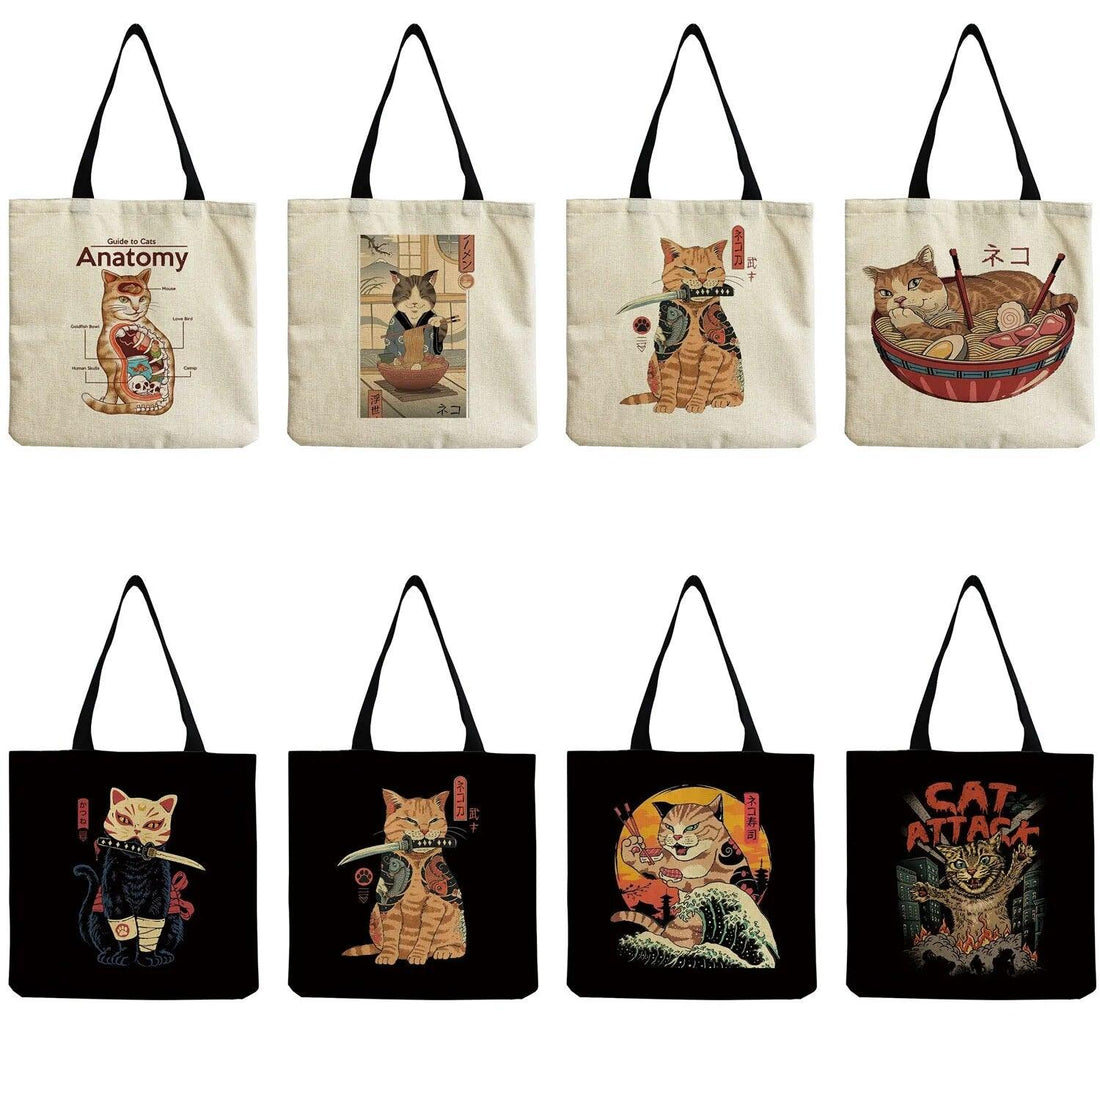 Japanese Style Cat Printed Tote Bag/Shopping Bag, Black/White, 18 designs - Just Cats - Gifts for Cat Lovers